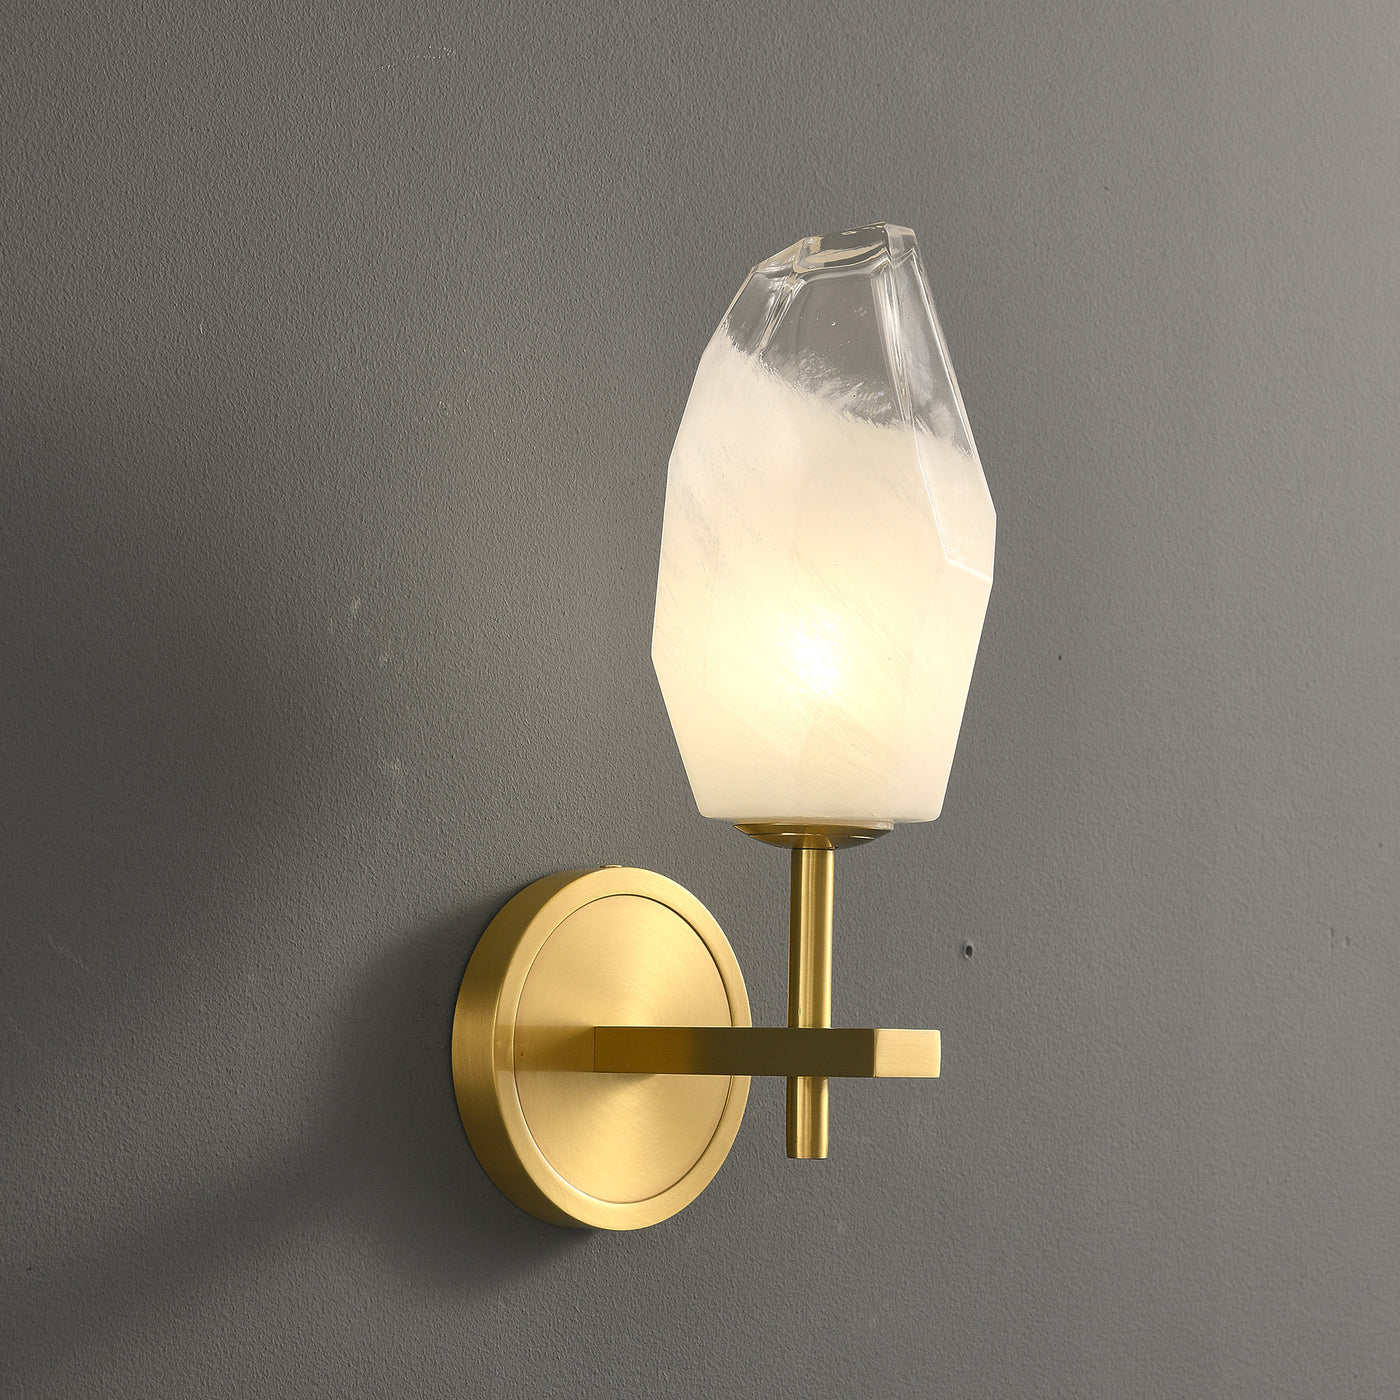 Lily glass Wall Sconce